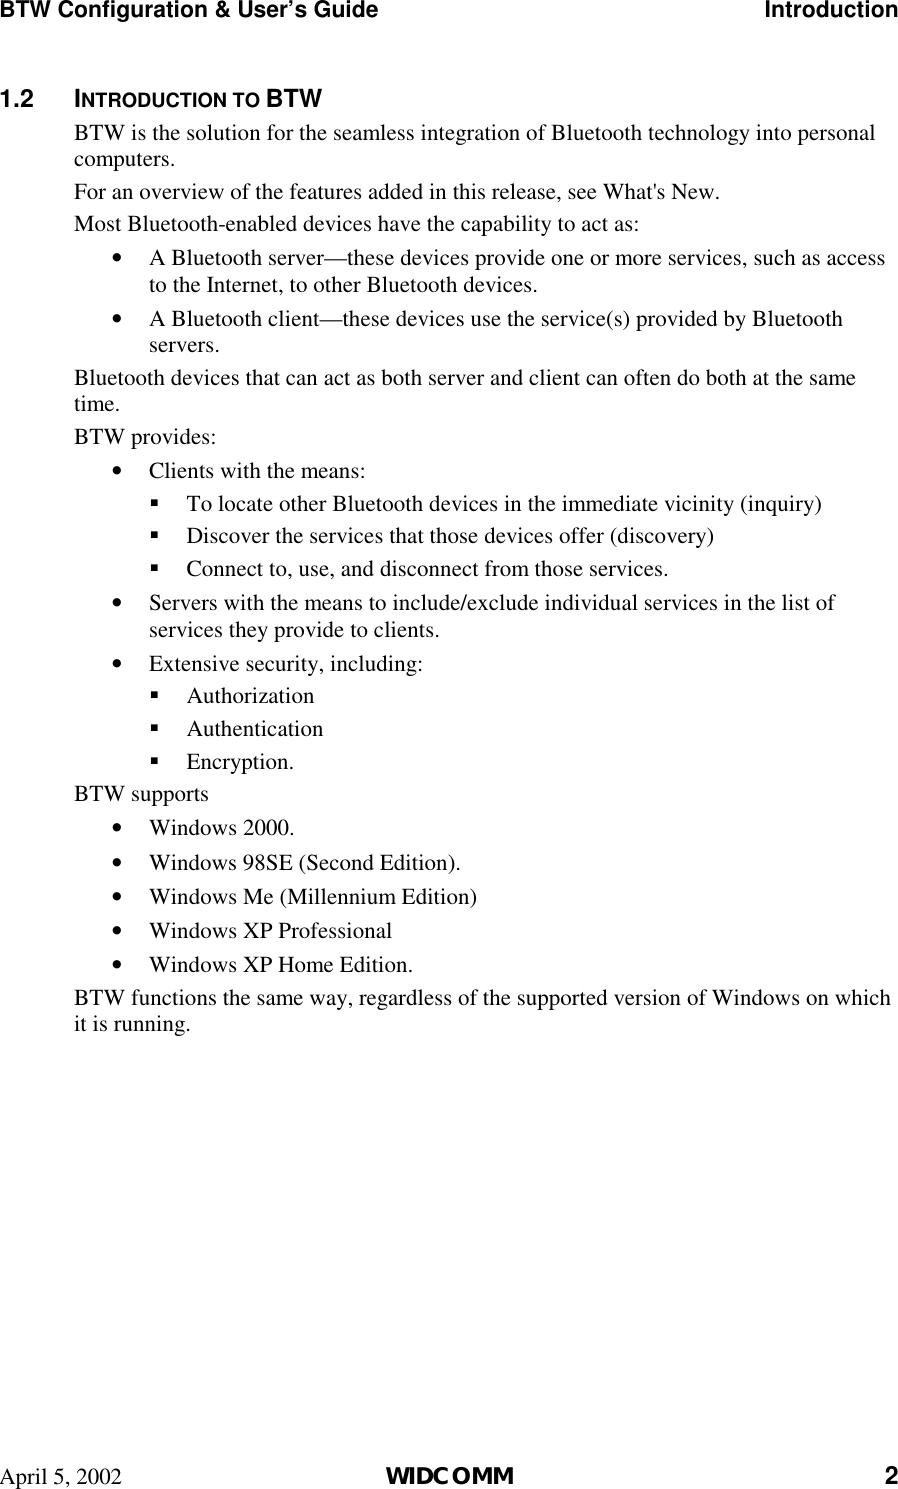 BTW Configuration &amp; User’s Guide    Introduction April 5, 2002  WIDCOMM 2 1.2 INTRODUCTION TO BTW BTW is the solution for the seamless integration of Bluetooth technology into personal computers. For an overview of the features added in this release, see What&apos;s New. Most Bluetooth-enabled devices have the capability to act as: •  A Bluetooth server—these devices provide one or more services, such as access to the Internet, to other Bluetooth devices. •  A Bluetooth client—these devices use the service(s) provided by Bluetooth servers. Bluetooth devices that can act as both server and client can often do both at the same time.  BTW provides: •  Clients with the means: !  To locate other Bluetooth devices in the immediate vicinity (inquiry) !  Discover the services that those devices offer (discovery) !  Connect to, use, and disconnect from those services. •  Servers with the means to include/exclude individual services in the list of services they provide to clients. •  Extensive security, including: !  Authorization !  Authentication !  Encryption. BTW supports •  Windows 2000. •  Windows 98SE (Second Edition). •  Windows Me (Millennium Edition) •  Windows XP Professional •  Windows XP Home Edition. BTW functions the same way, regardless of the supported version of Windows on which it is running. 